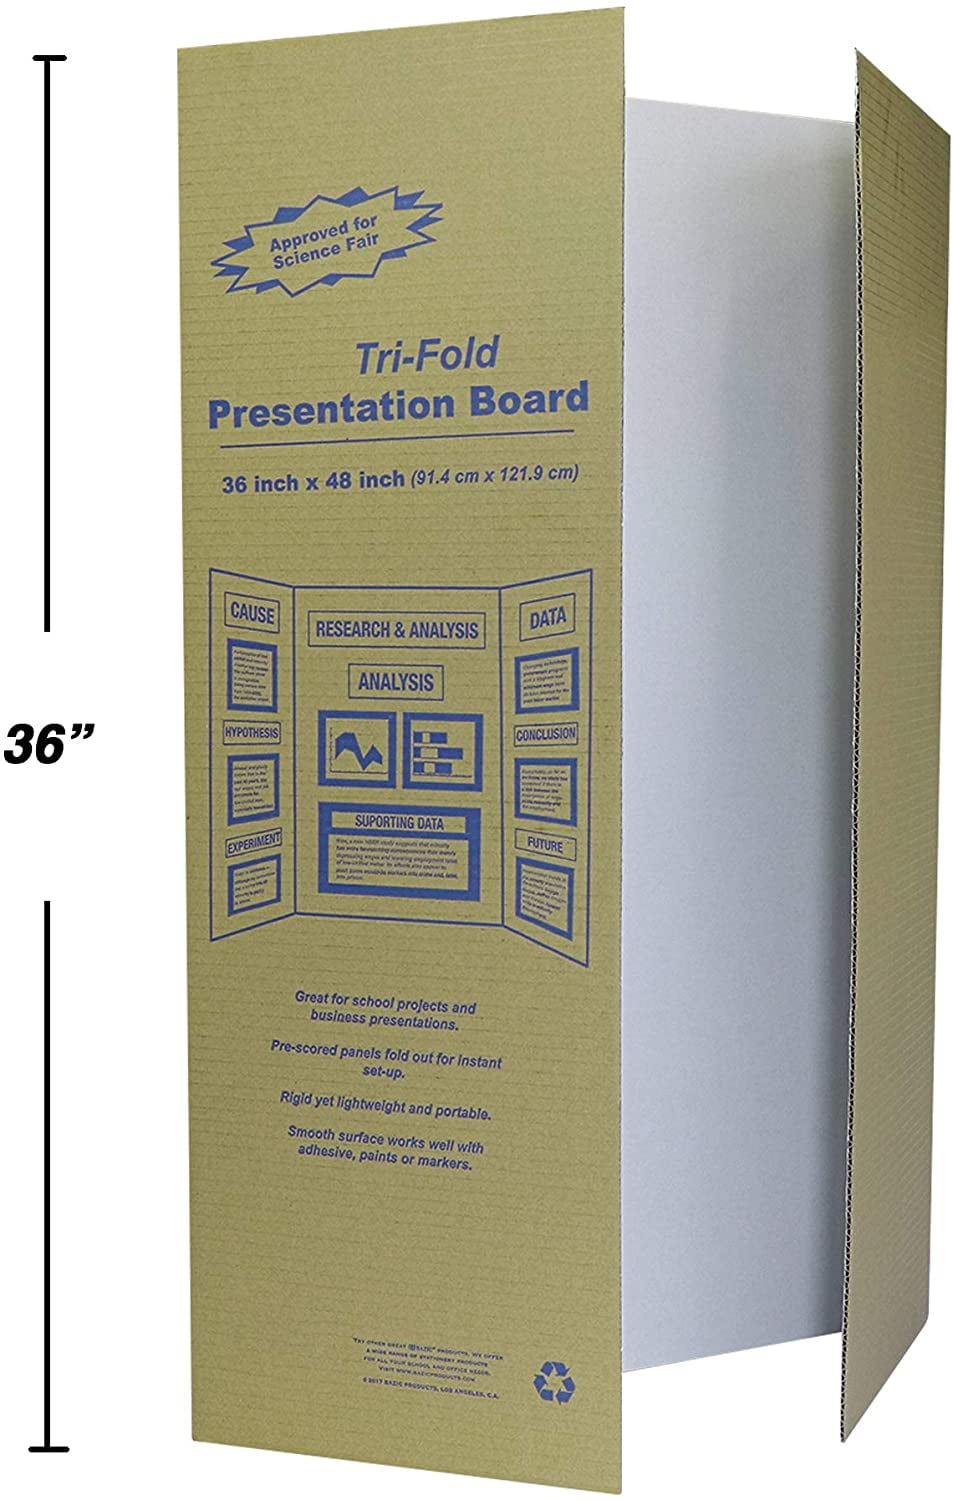 Assorted Colors Tri-Fold Presentation Board 36 x 48 Display Exhibition Board Lightweight and Portable with Smooth Surface Great Business presentations by Emraw 